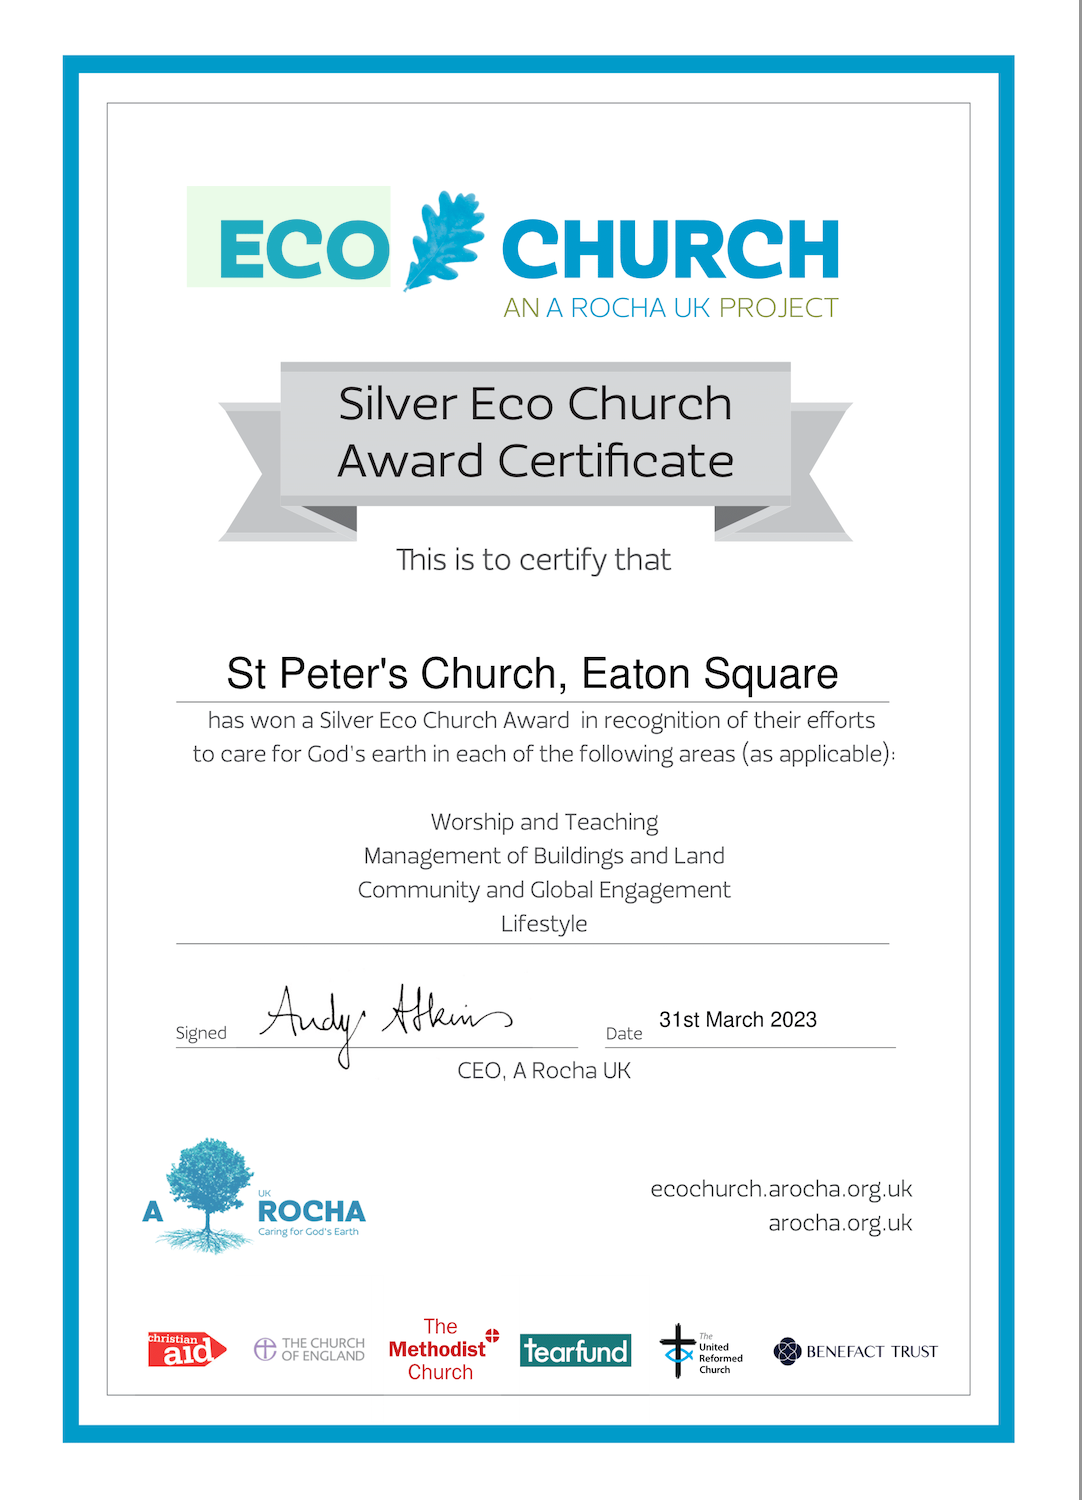 St Peter's earns a Silver Award for Eco Church!